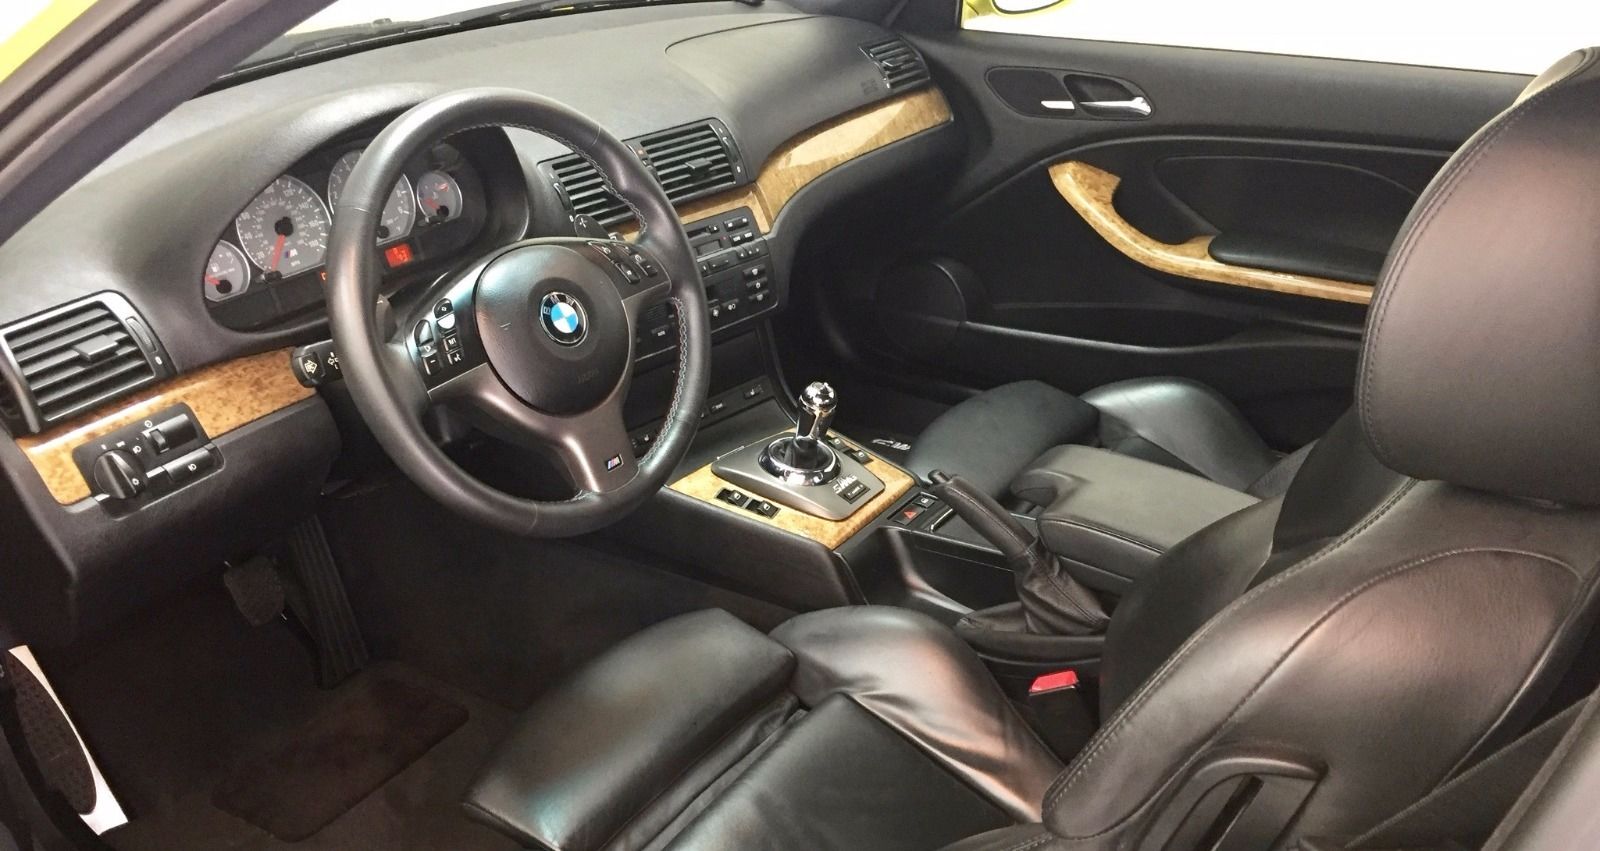 2002 Bmw M3 With 11 000 Miles German Cars For Sale Blog